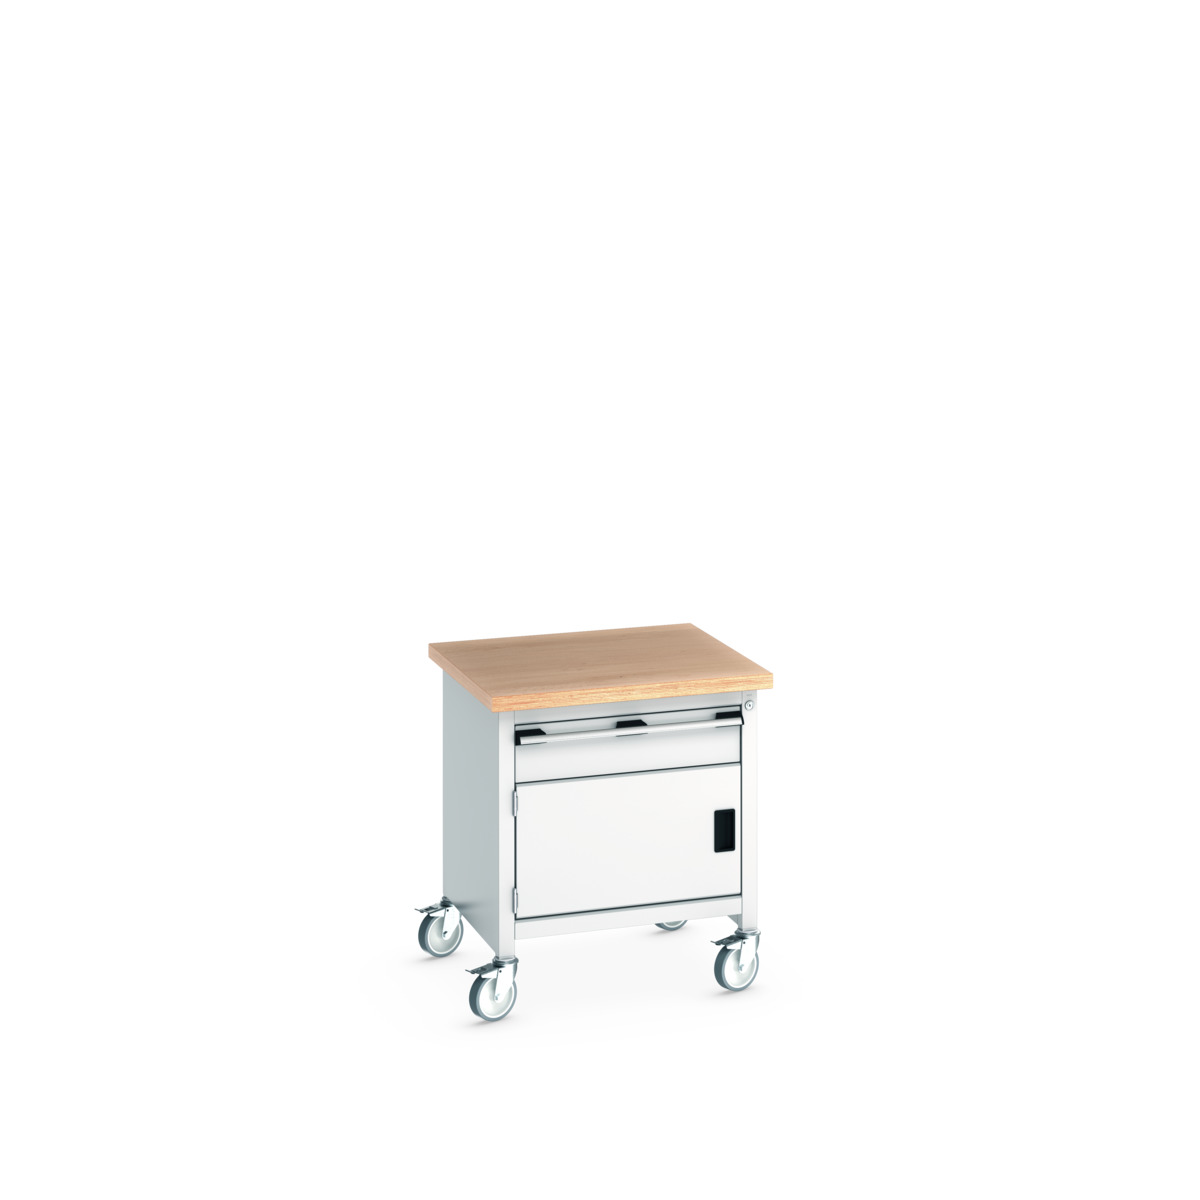 41002088.16V - cubio mobile storage bench (mpx)